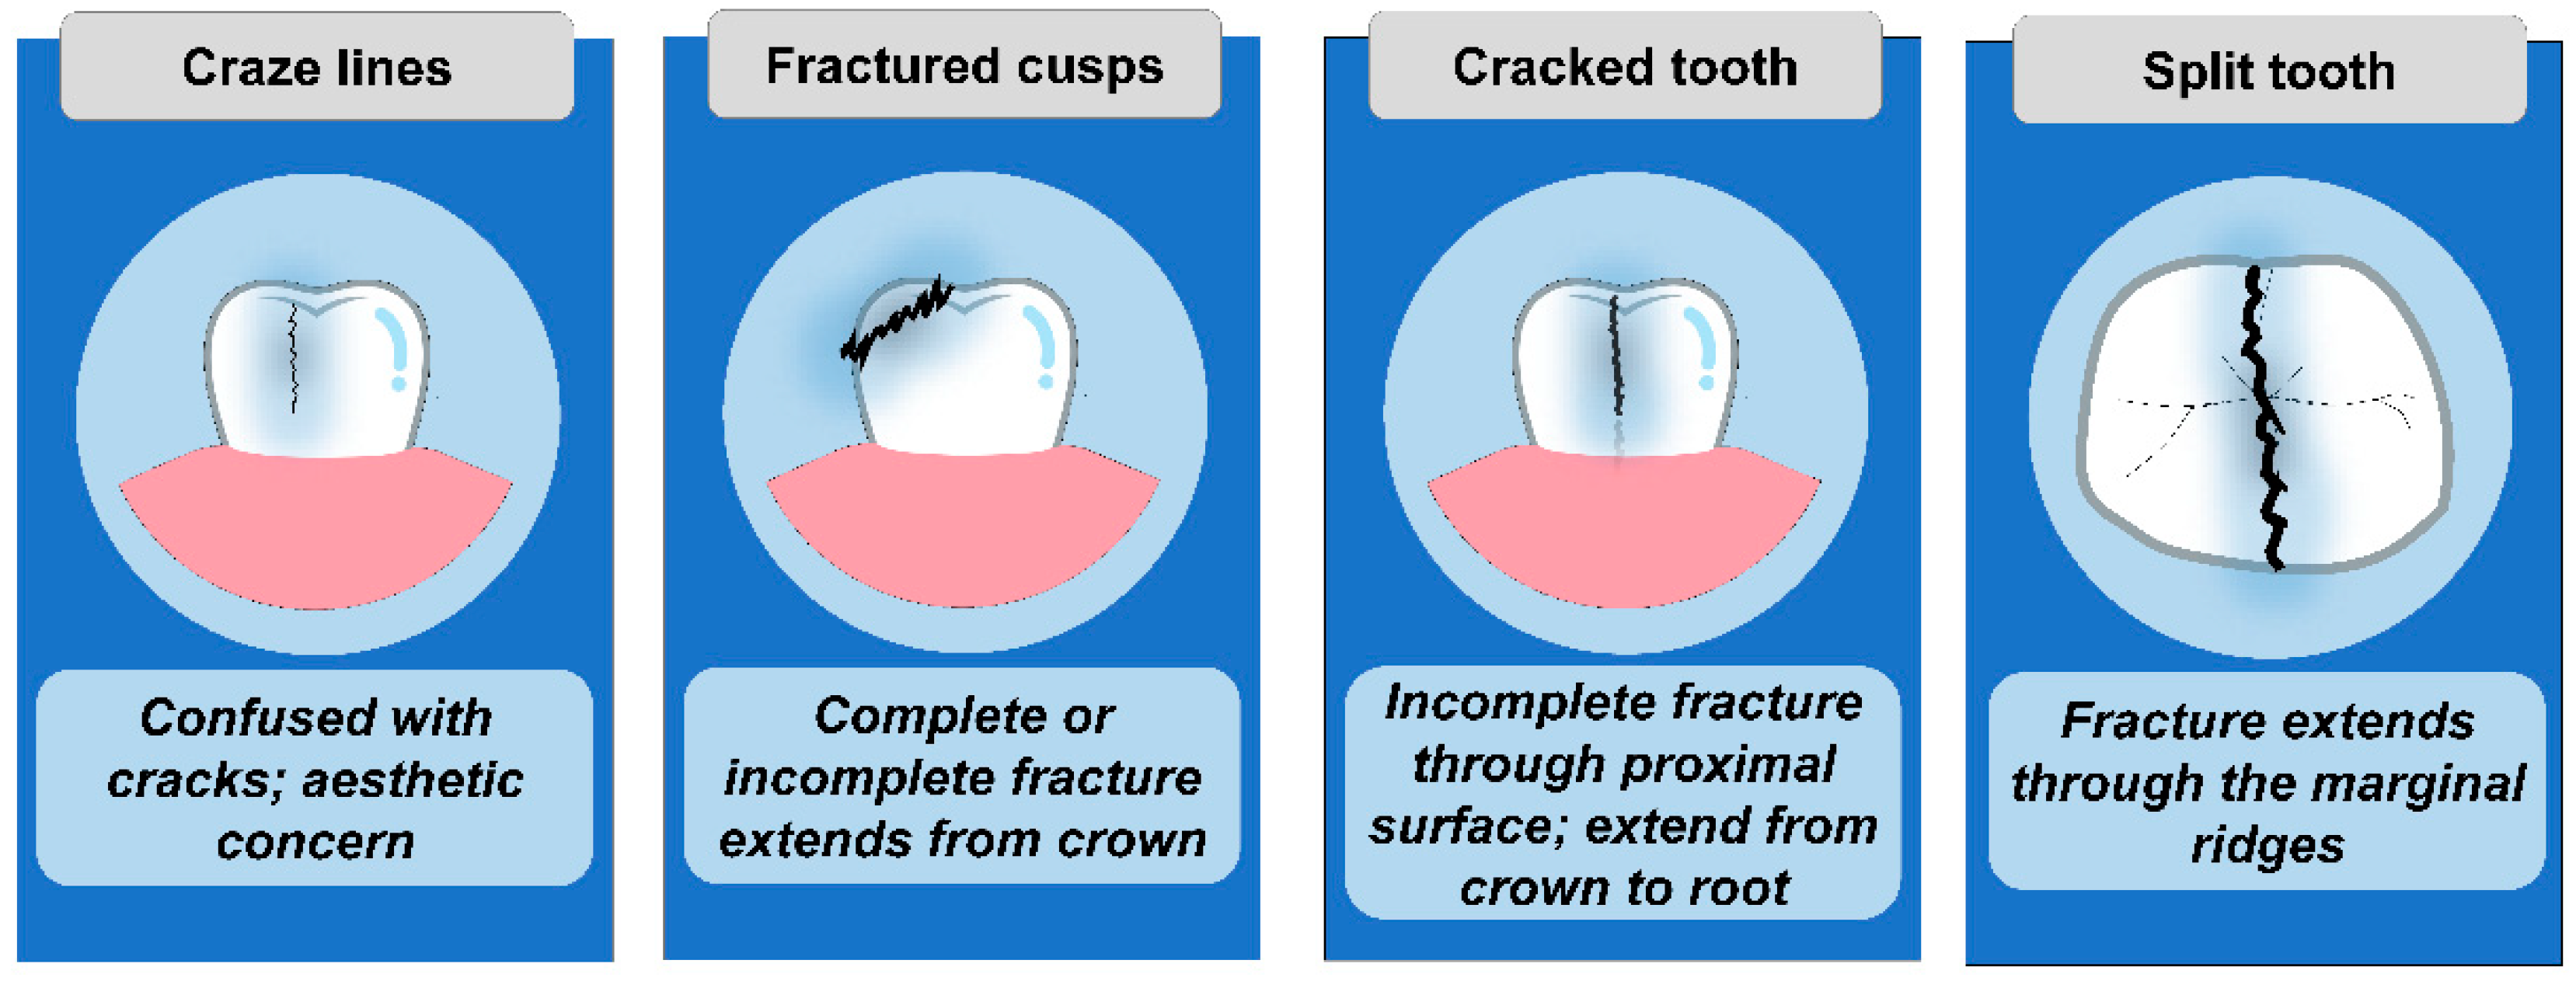 What Causes Craze Lines on Front Teeth?